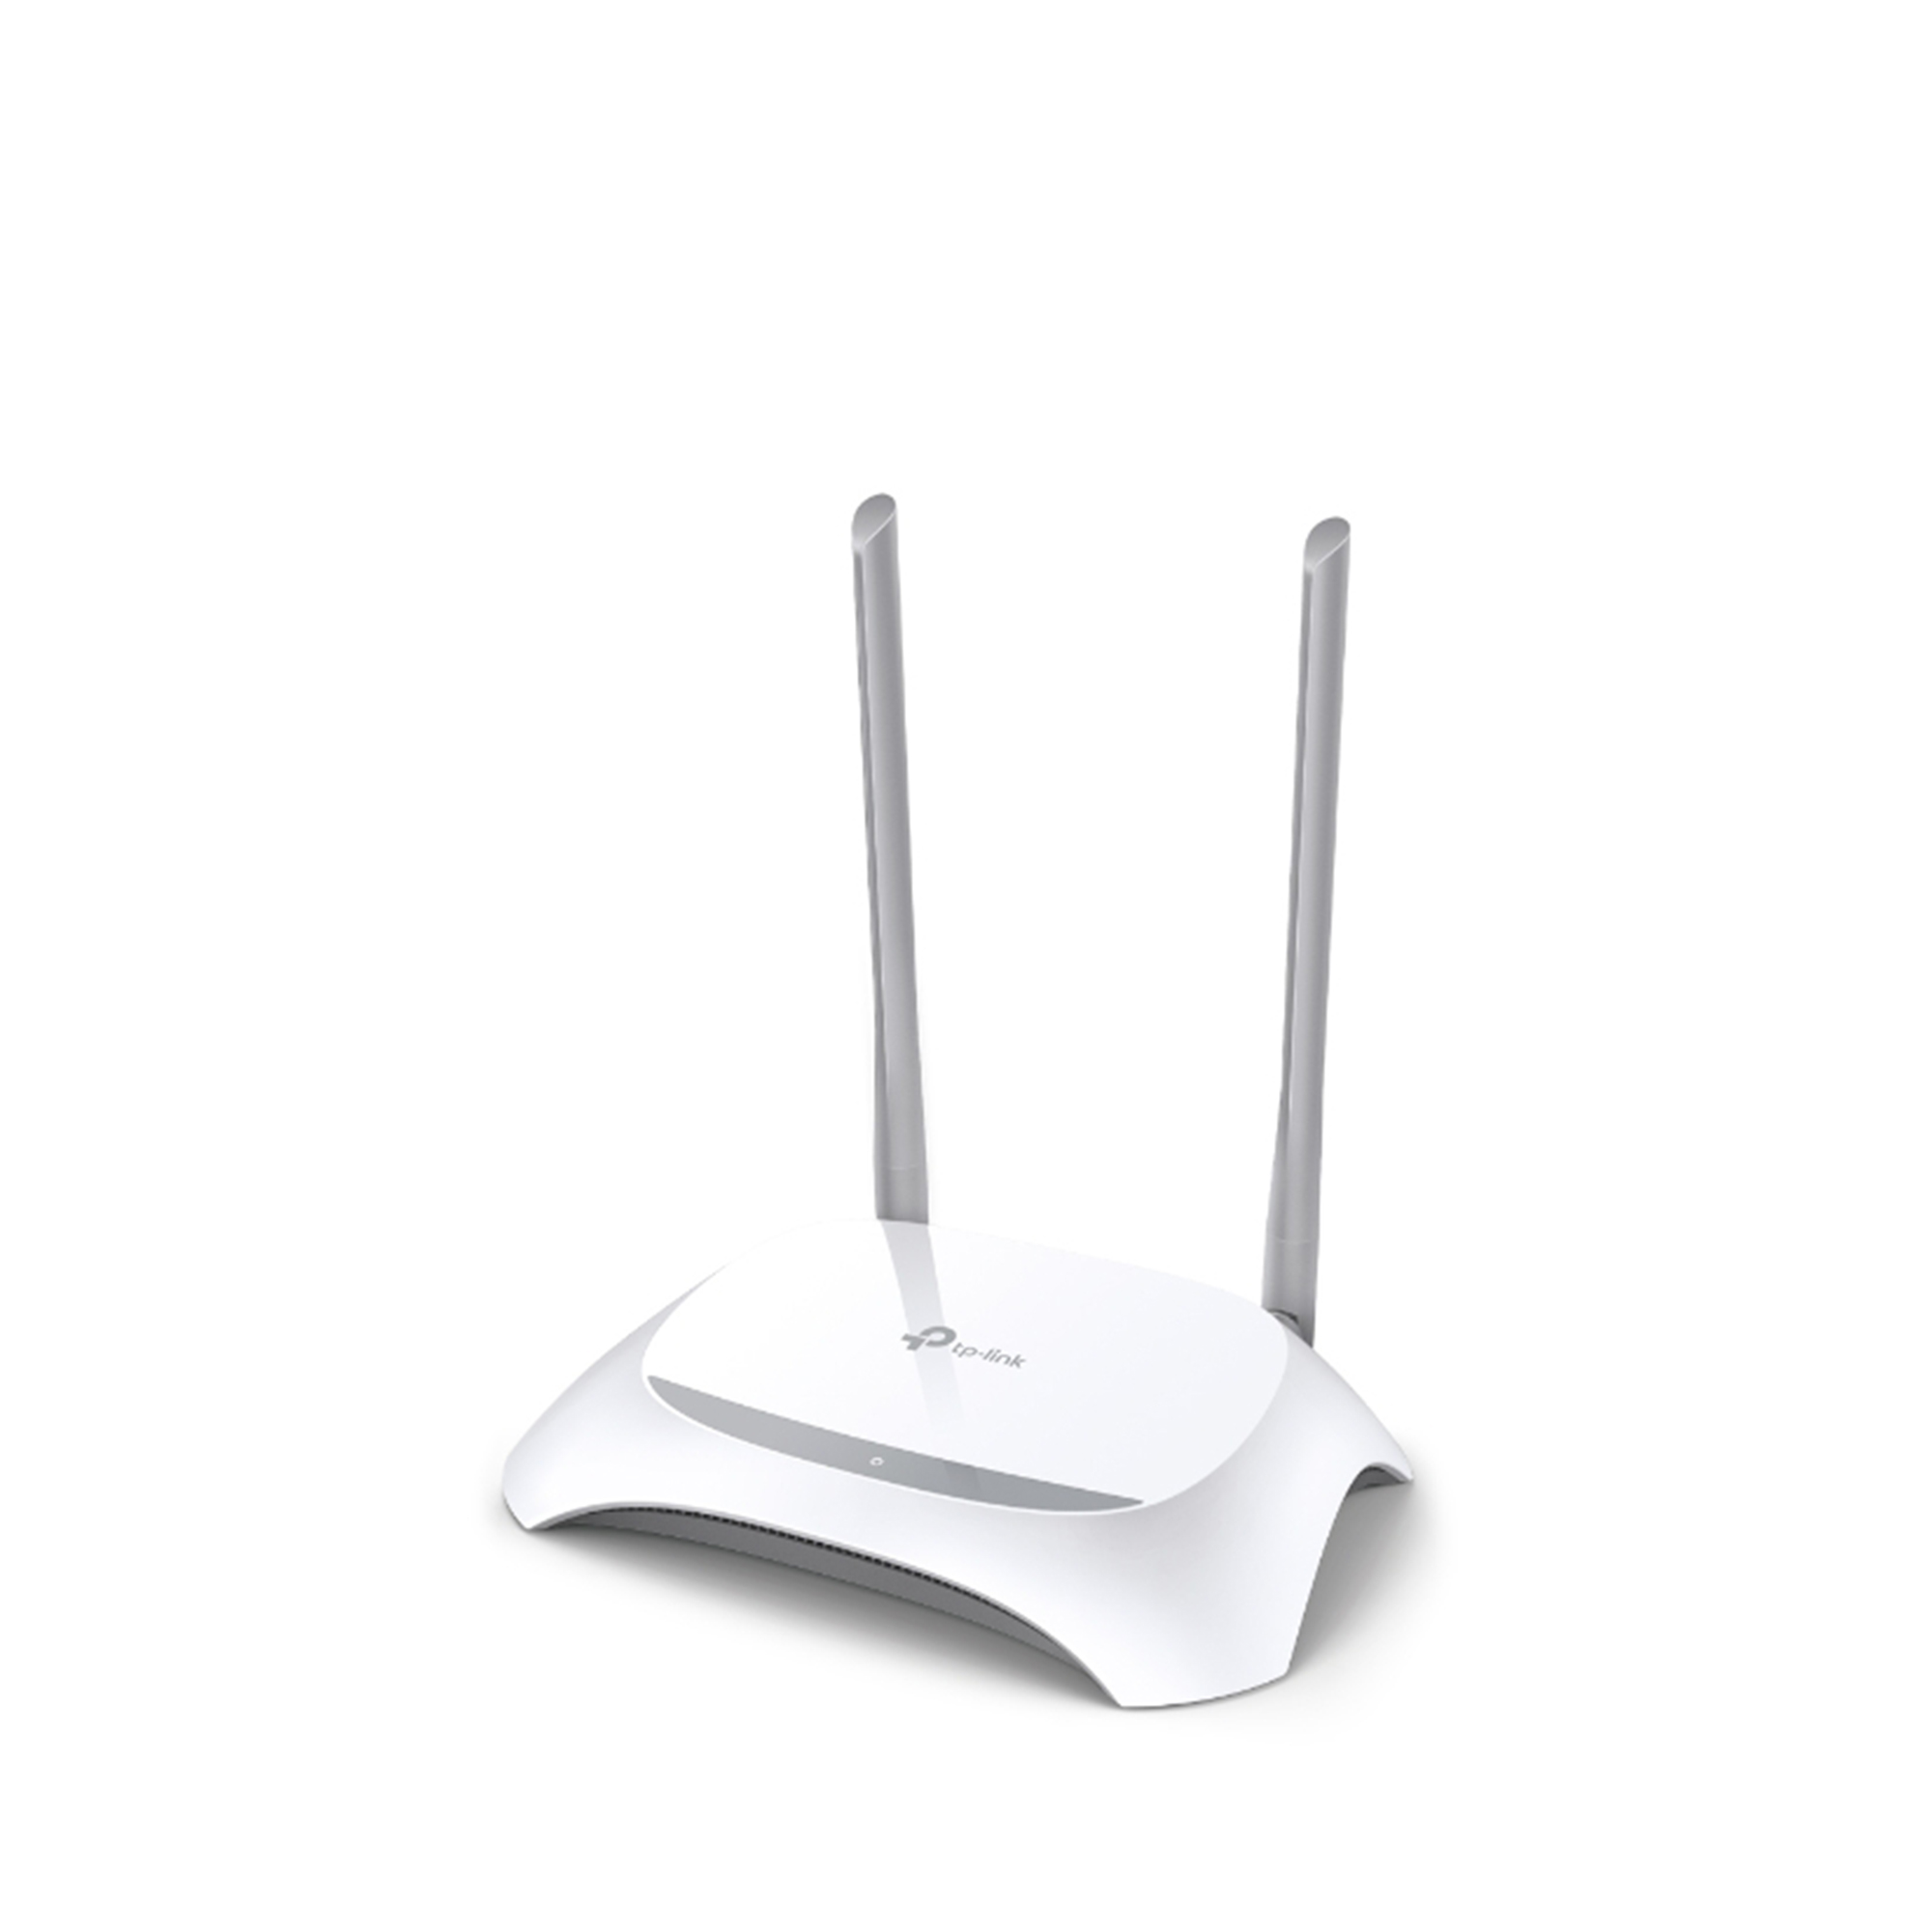 https://accenthub.com.ph/wp-content/uploads/2022/10/TP-LINK-TL-WR840N-300MBPS-WIRELESS-N-SPEED-ROUTER-WHITE-1.jpg